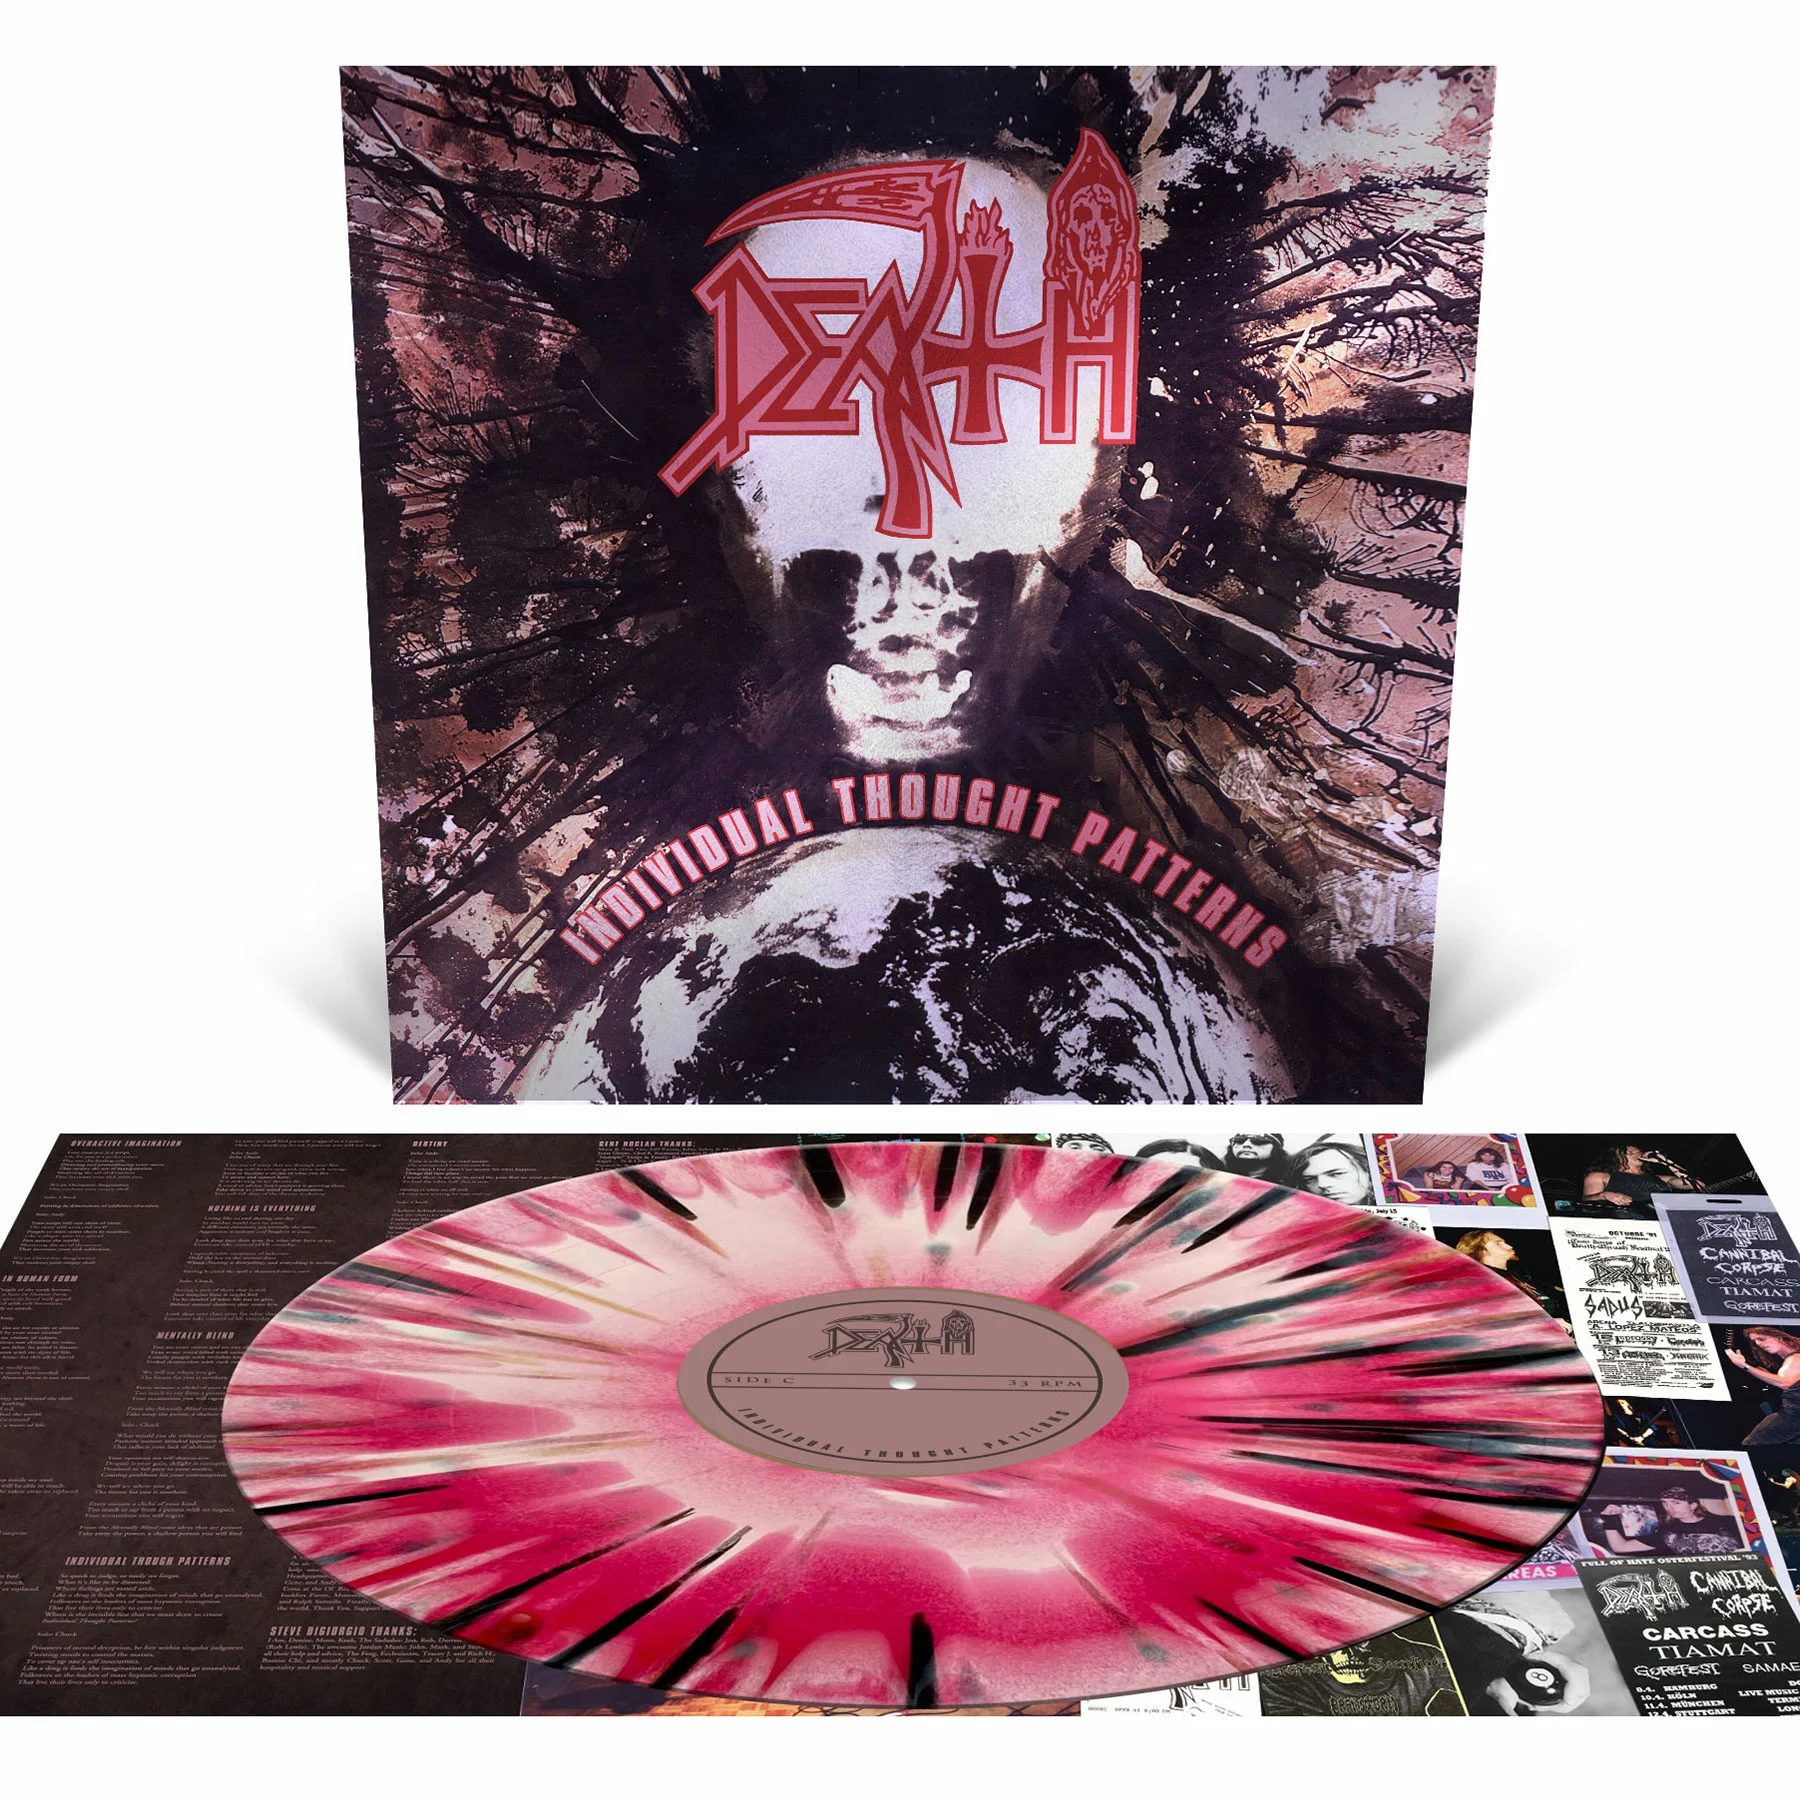 DEATH - Individual Thought Patterns (Re-Issue) [PINK/WHITE/RED MERGE SPLATTER LP]